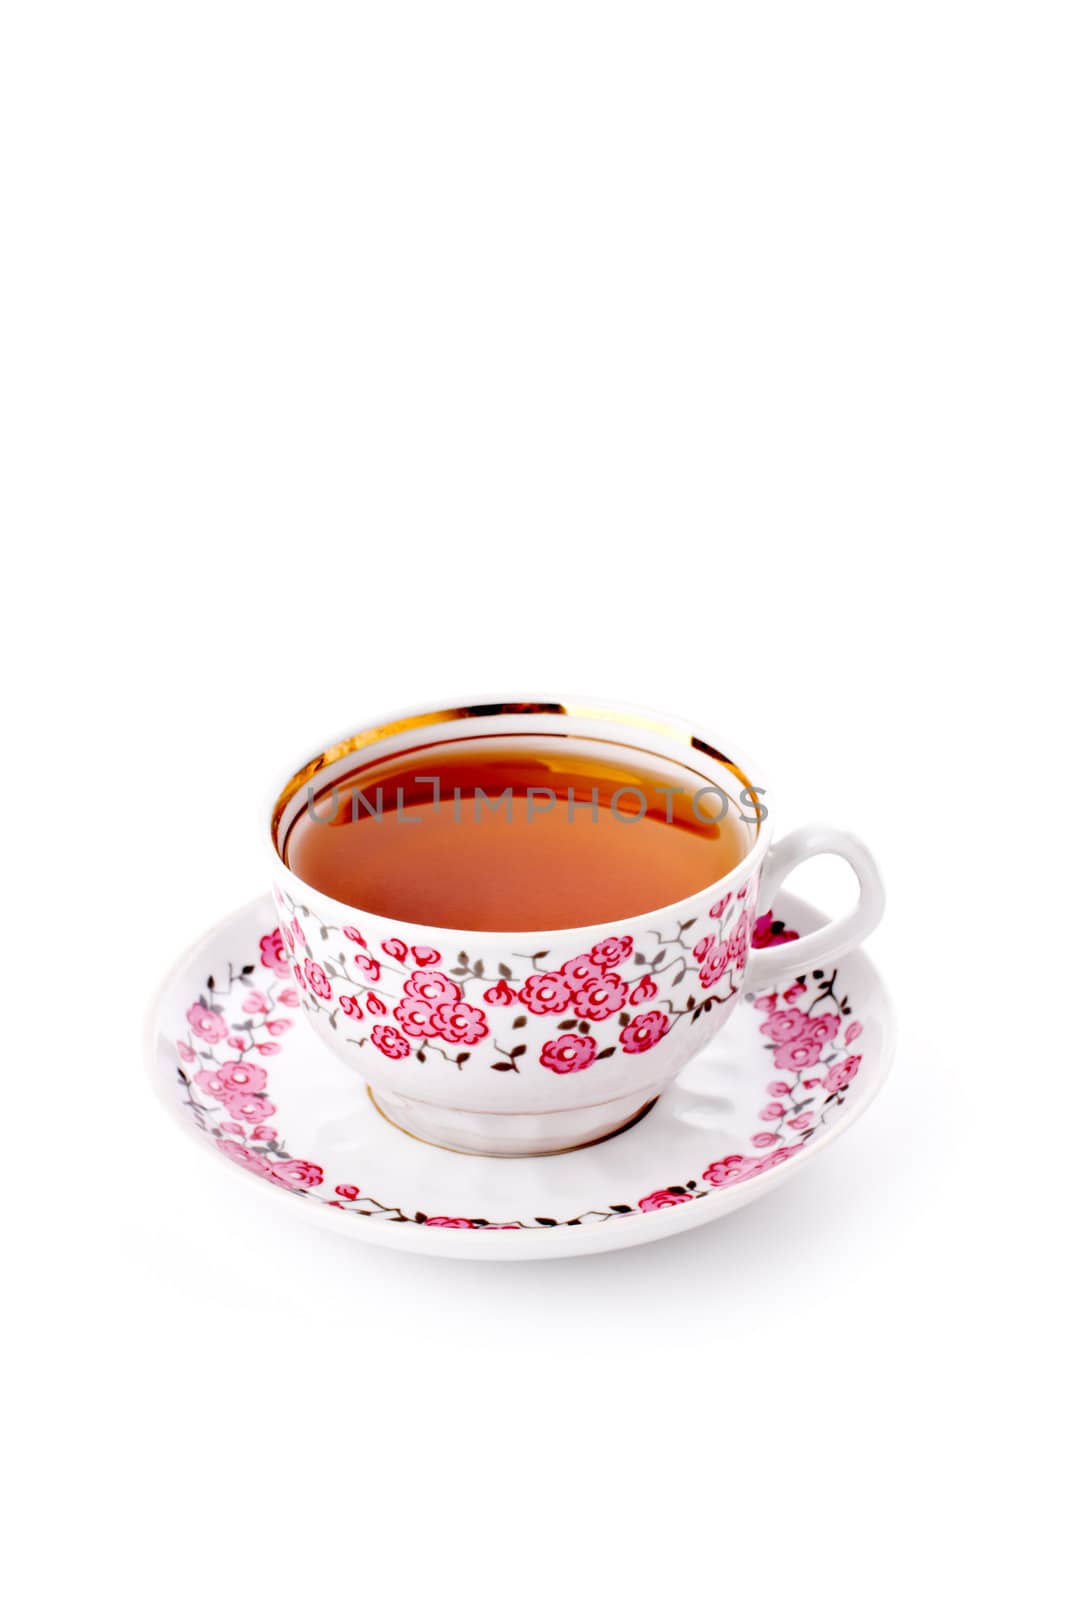 Elegant porcelain cup of tea isolated over white